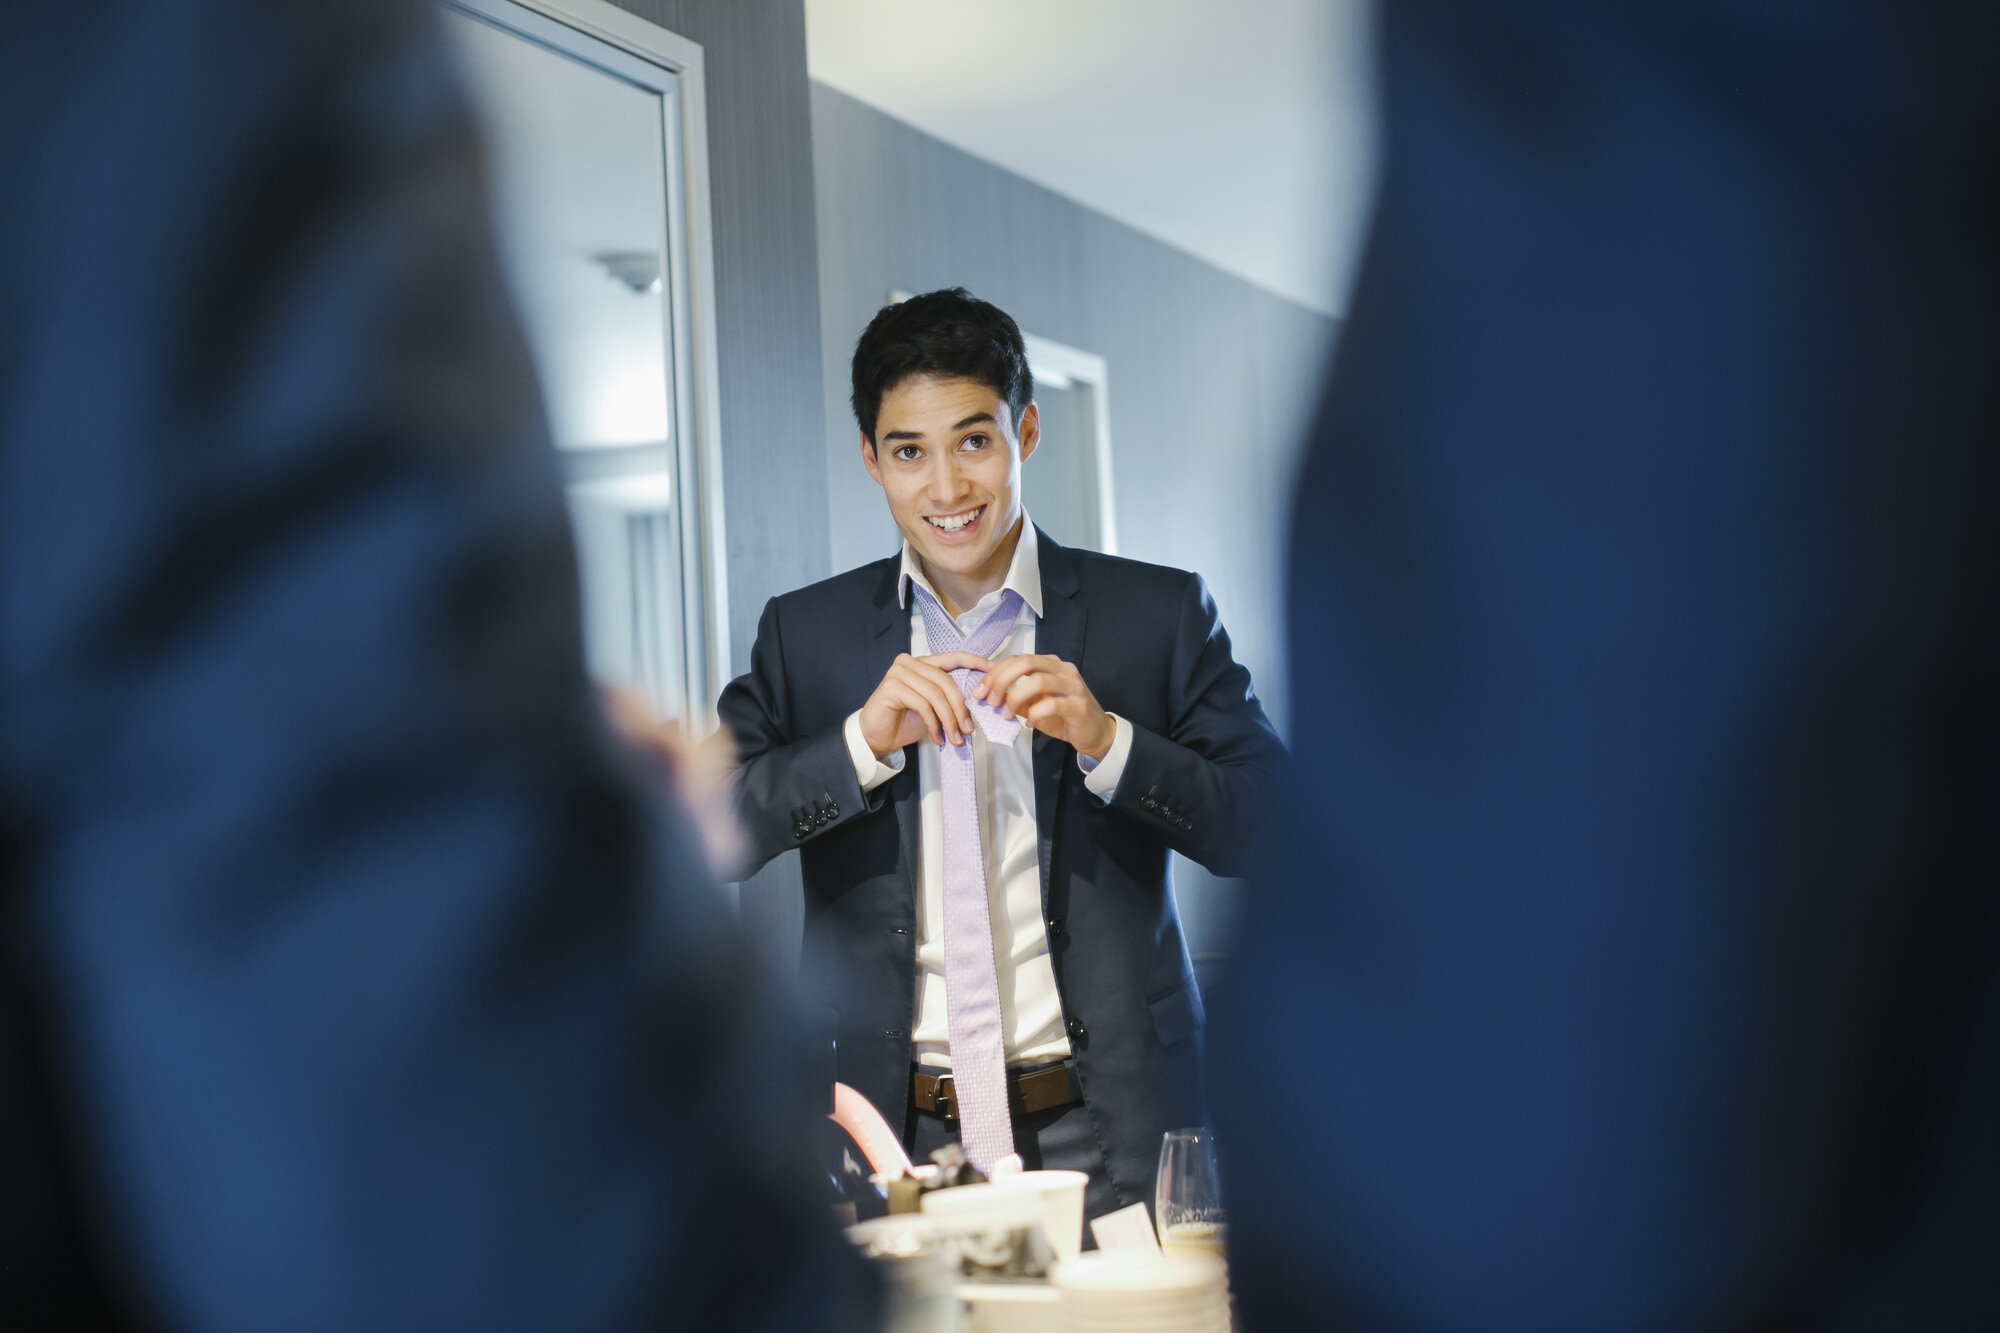 Groom in blue suit gets ready on his wedding day